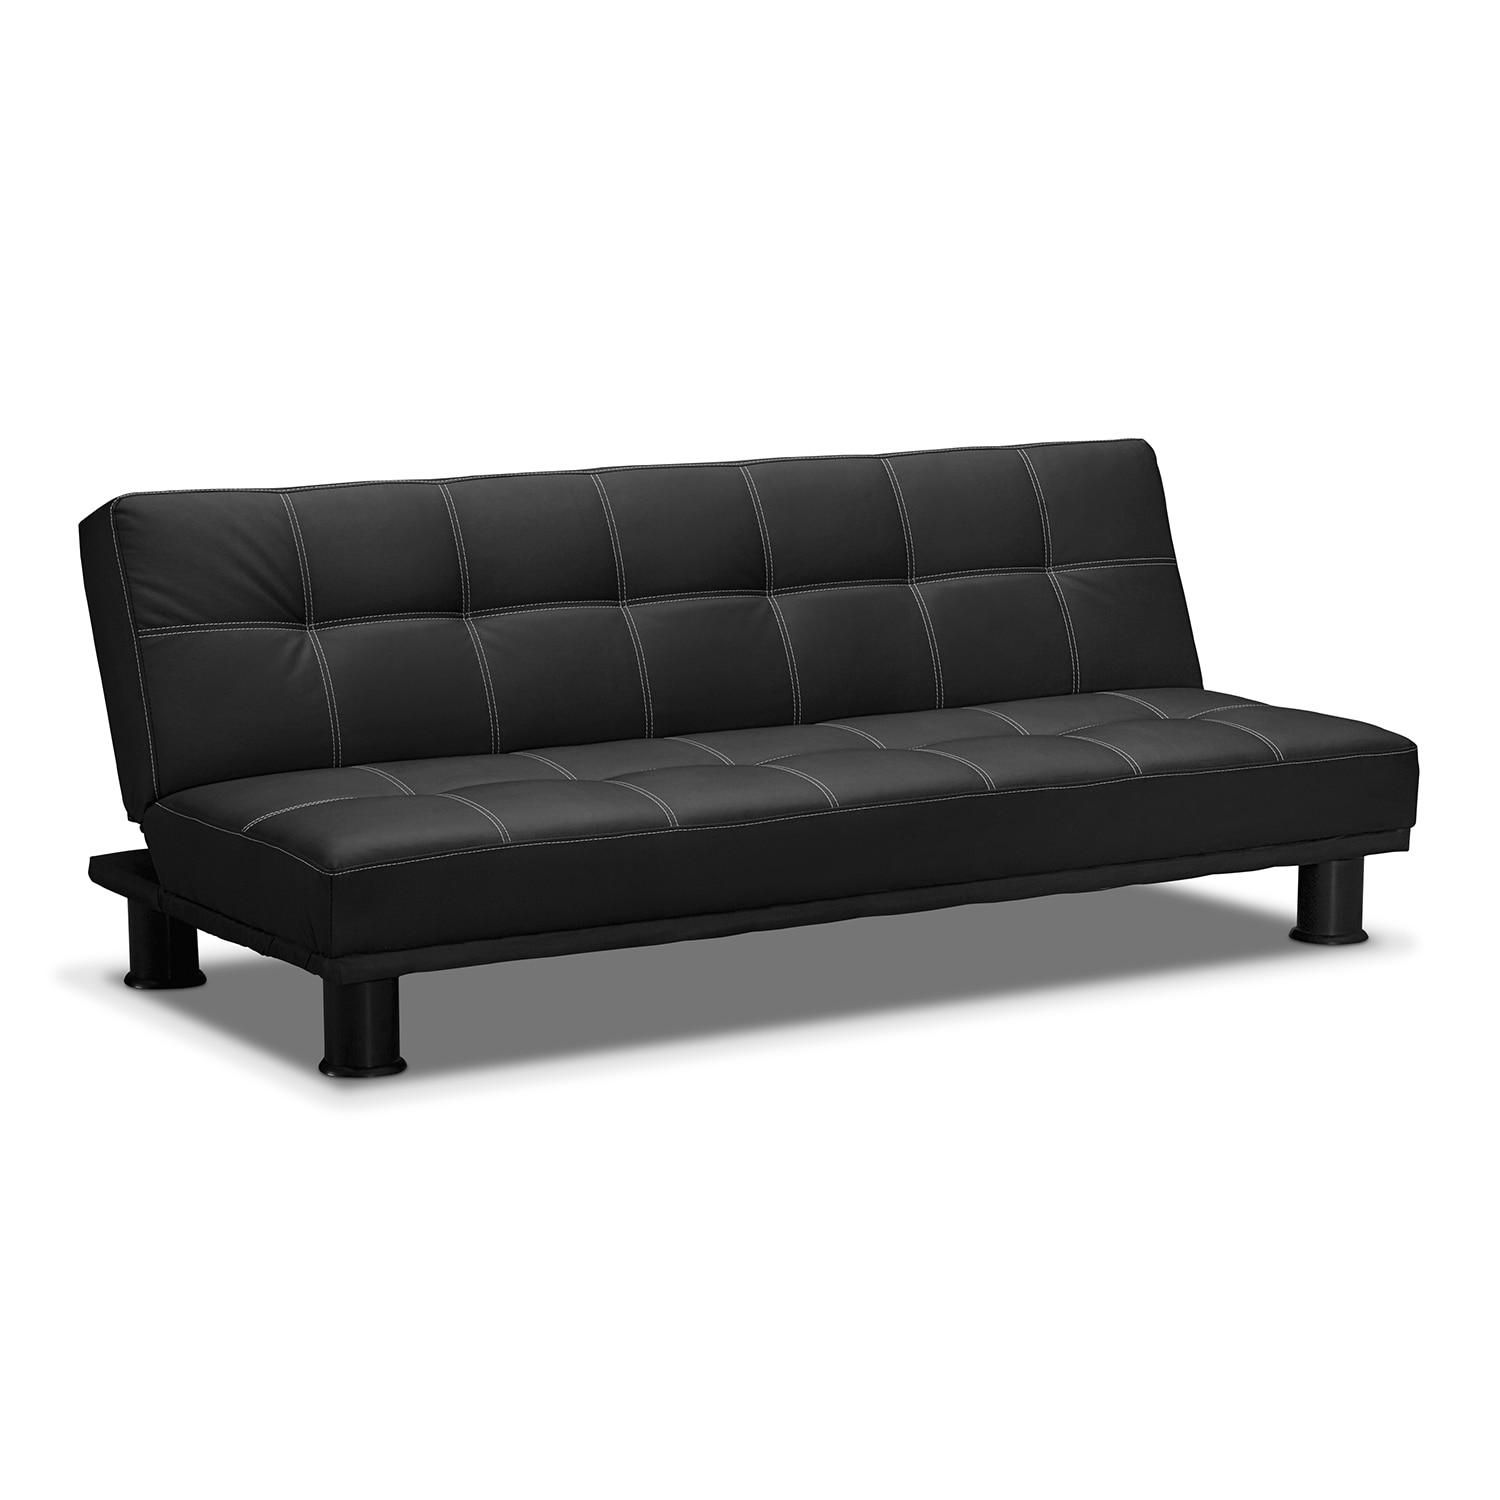 Phyllo Futon Sofa Bed – Black | Value City Furniture In Leather Fouton Sofas (View 1 of 20)